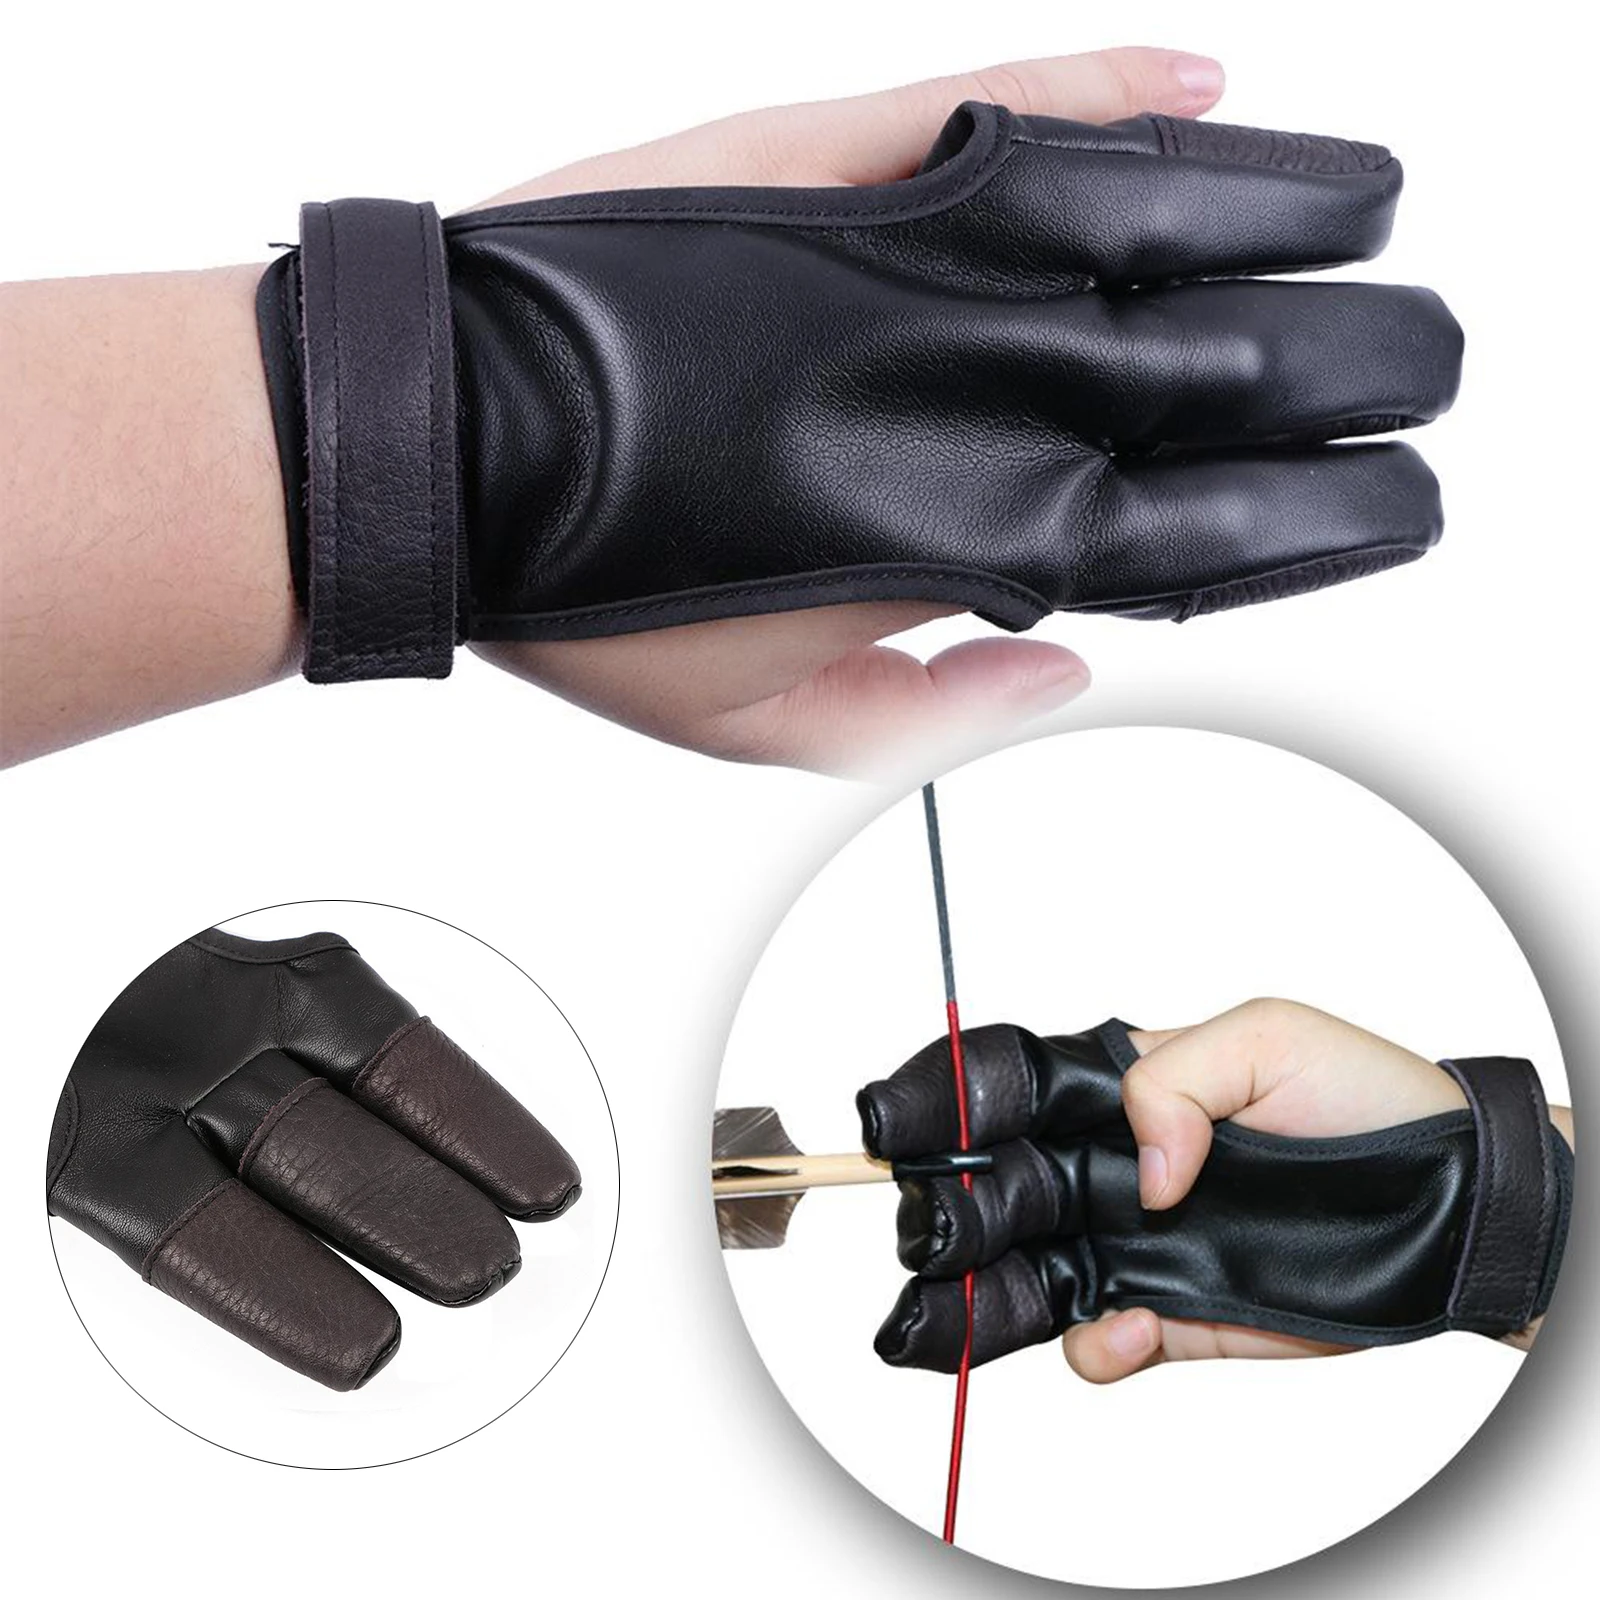 Archery Gloves 3-Finger Shooting Adults Kids Fingers Tab Adjustable Guard